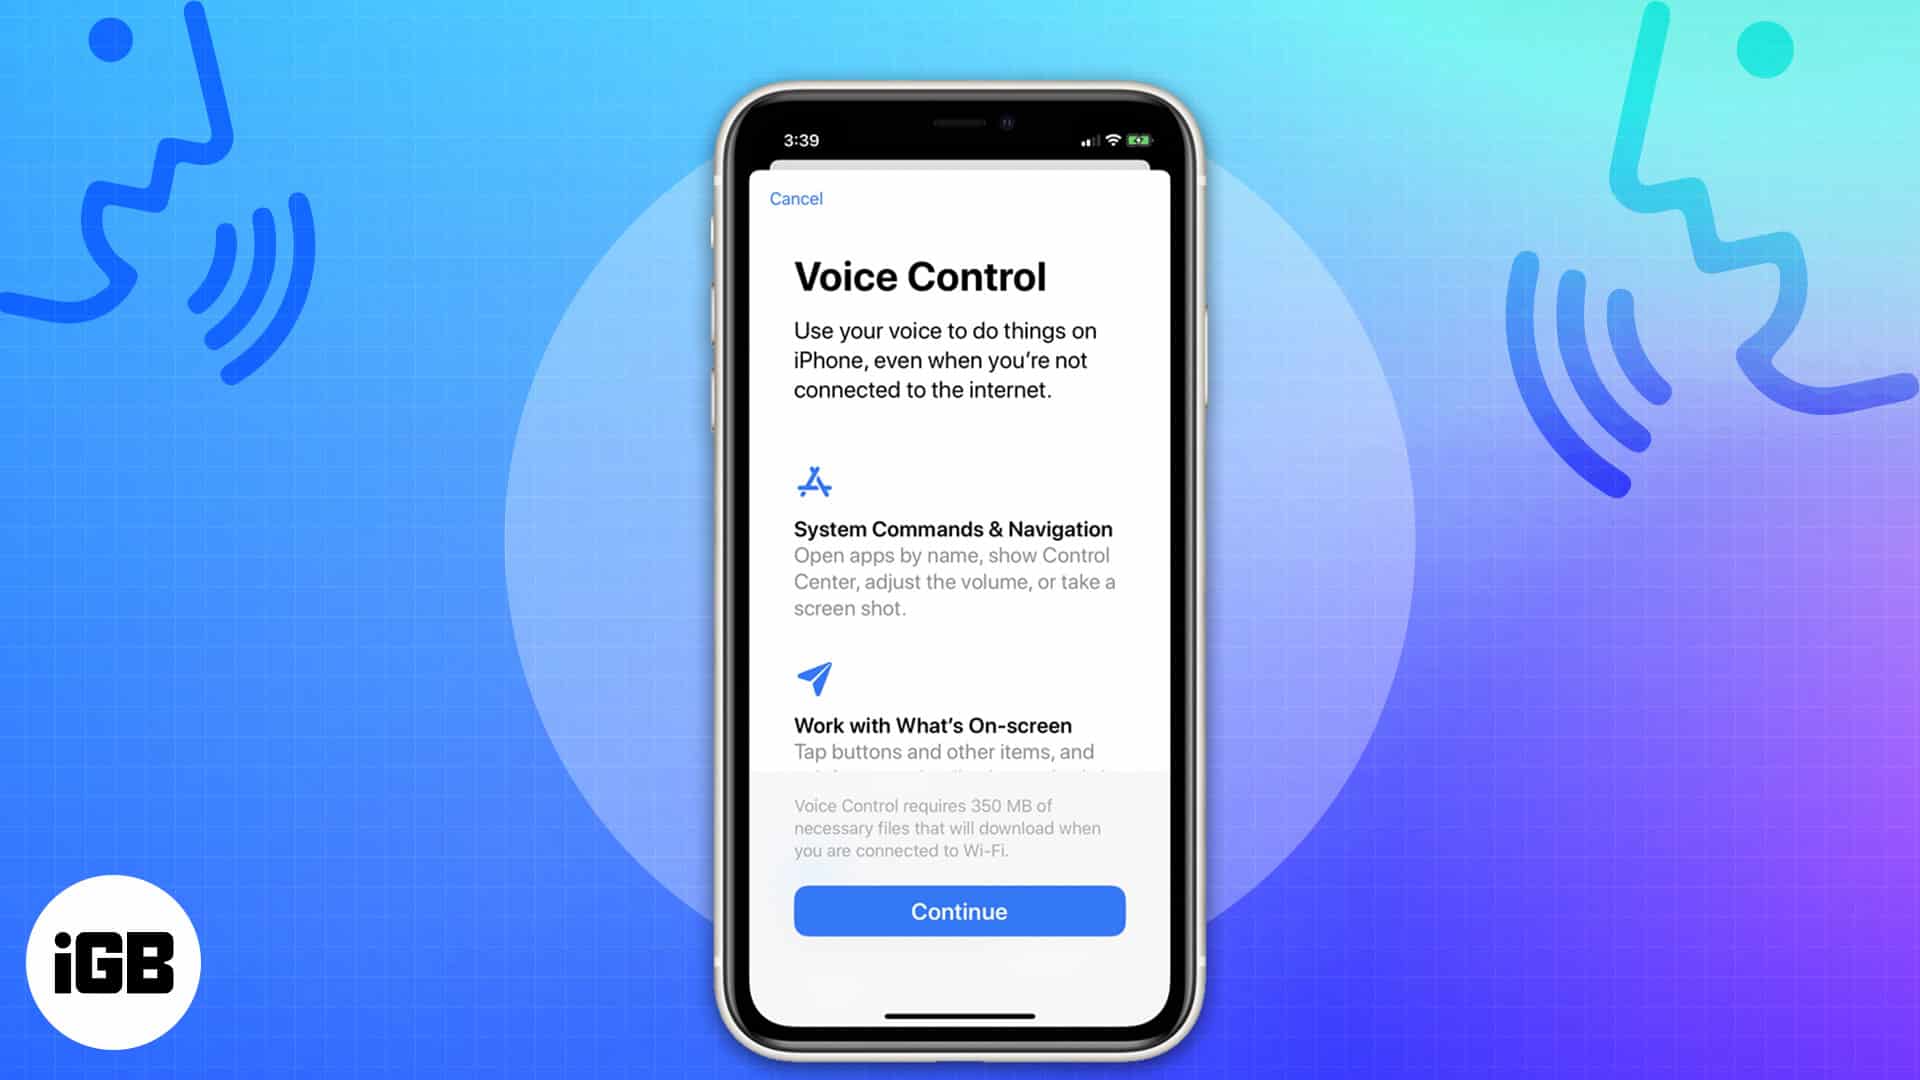 How to use voice control on iphone